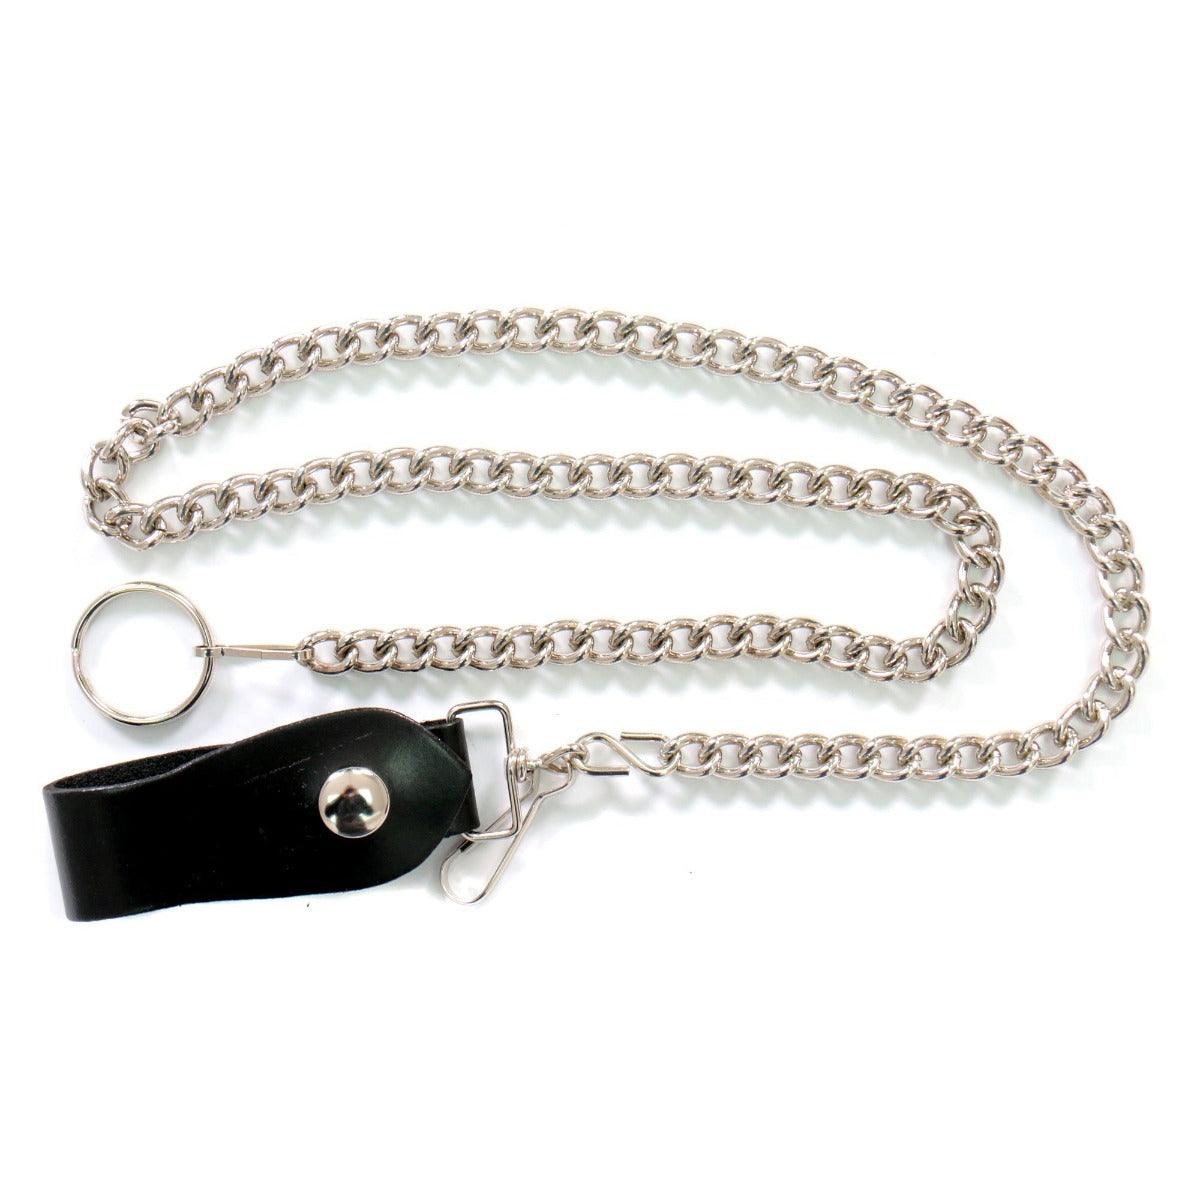 Hot Leathers 30" Wallet Chain With Key Ring - American Legend Rider